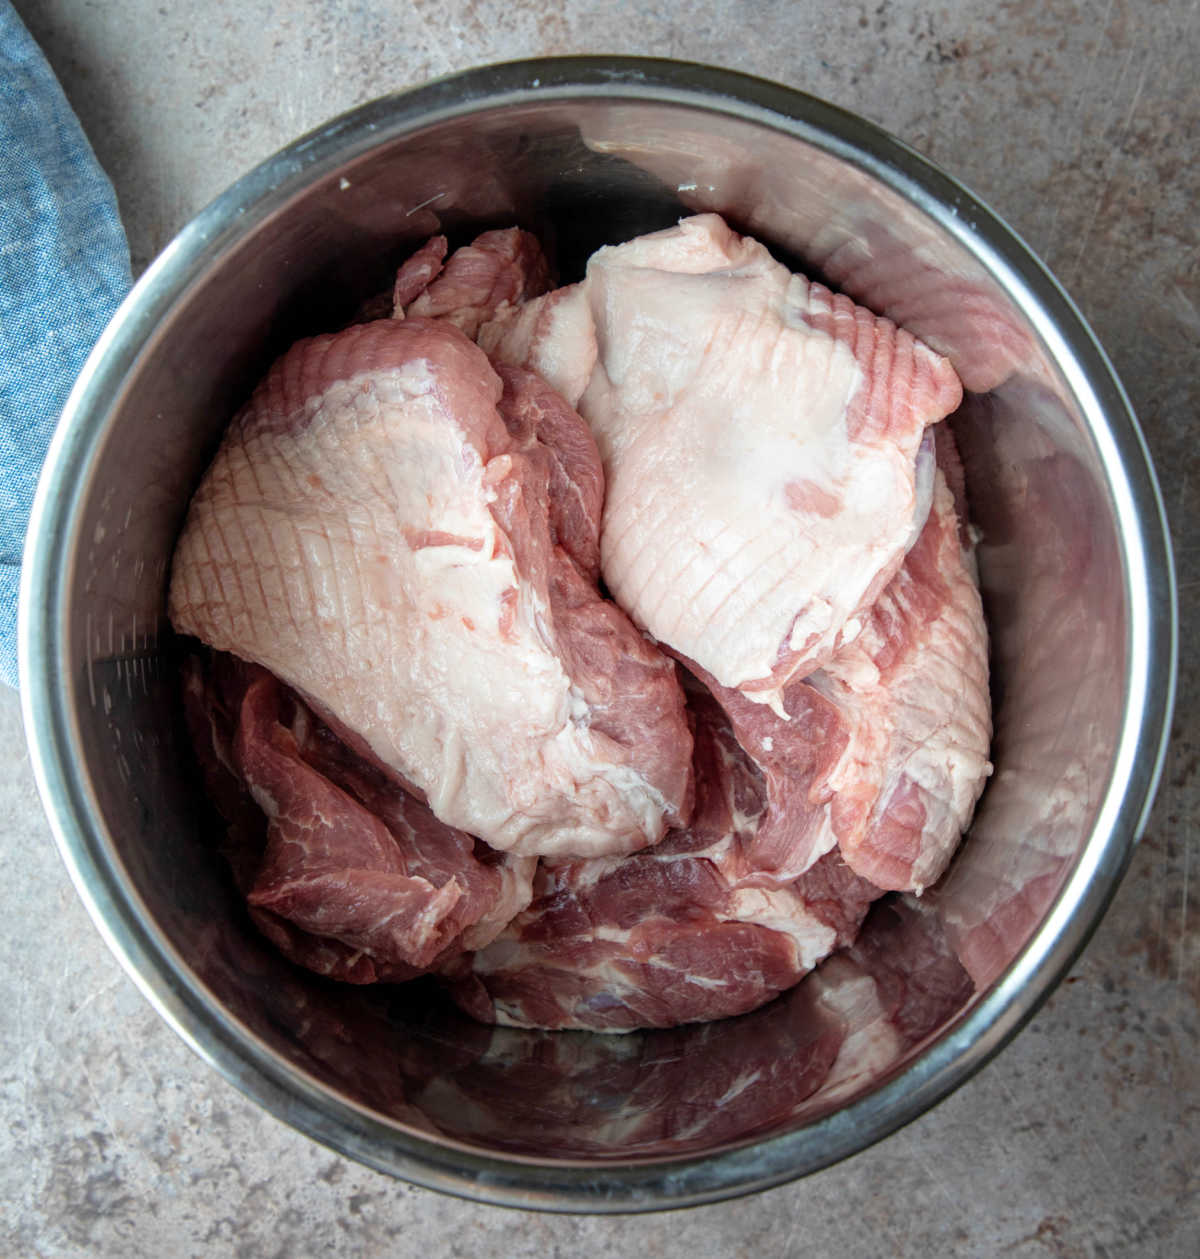 Pork pieces in an instant pot.